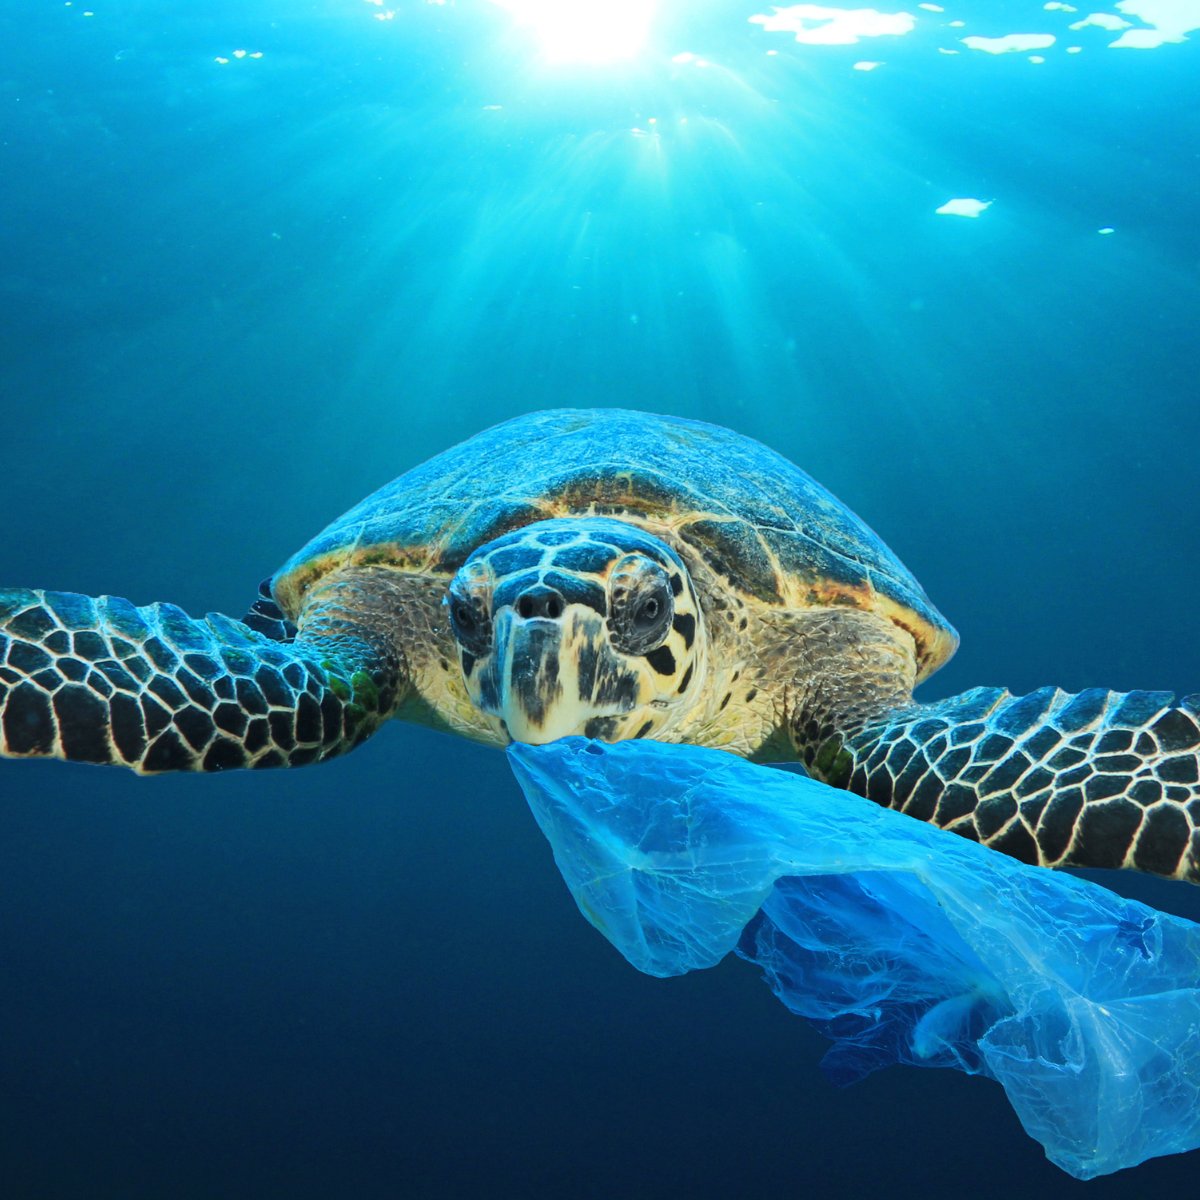 @GlobalGoalsUN Plastic waste is a major environmental threat, harming wildlife and ecosystems. The @PrimusProjectEu tackles this challenge by promoting efficient and sustainable plastic utilization, aiming to reduce the accumulation of non-recycled or underutilized plastic. #savetheocean